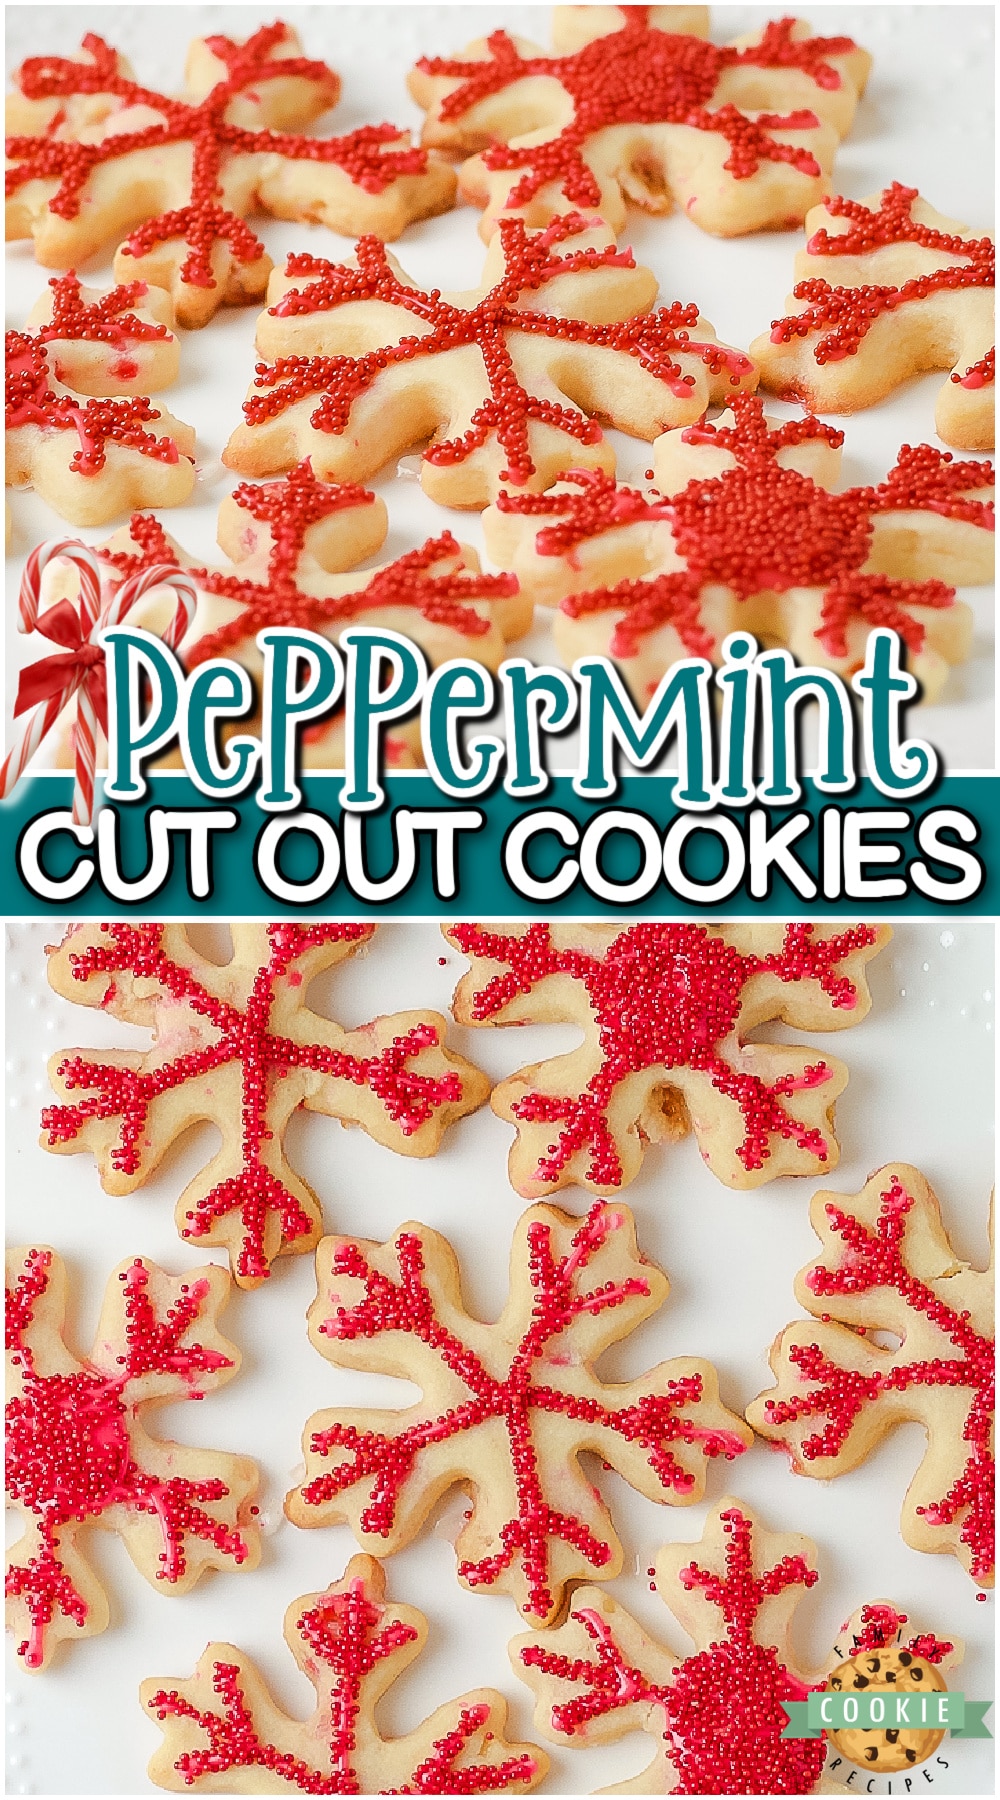 Peppermint Cutout cookies made with classic ingredients + crushed candy canes and a simple vanilla glaze! Buttery, festive cut out sugar cookies perfect for Christmas! 